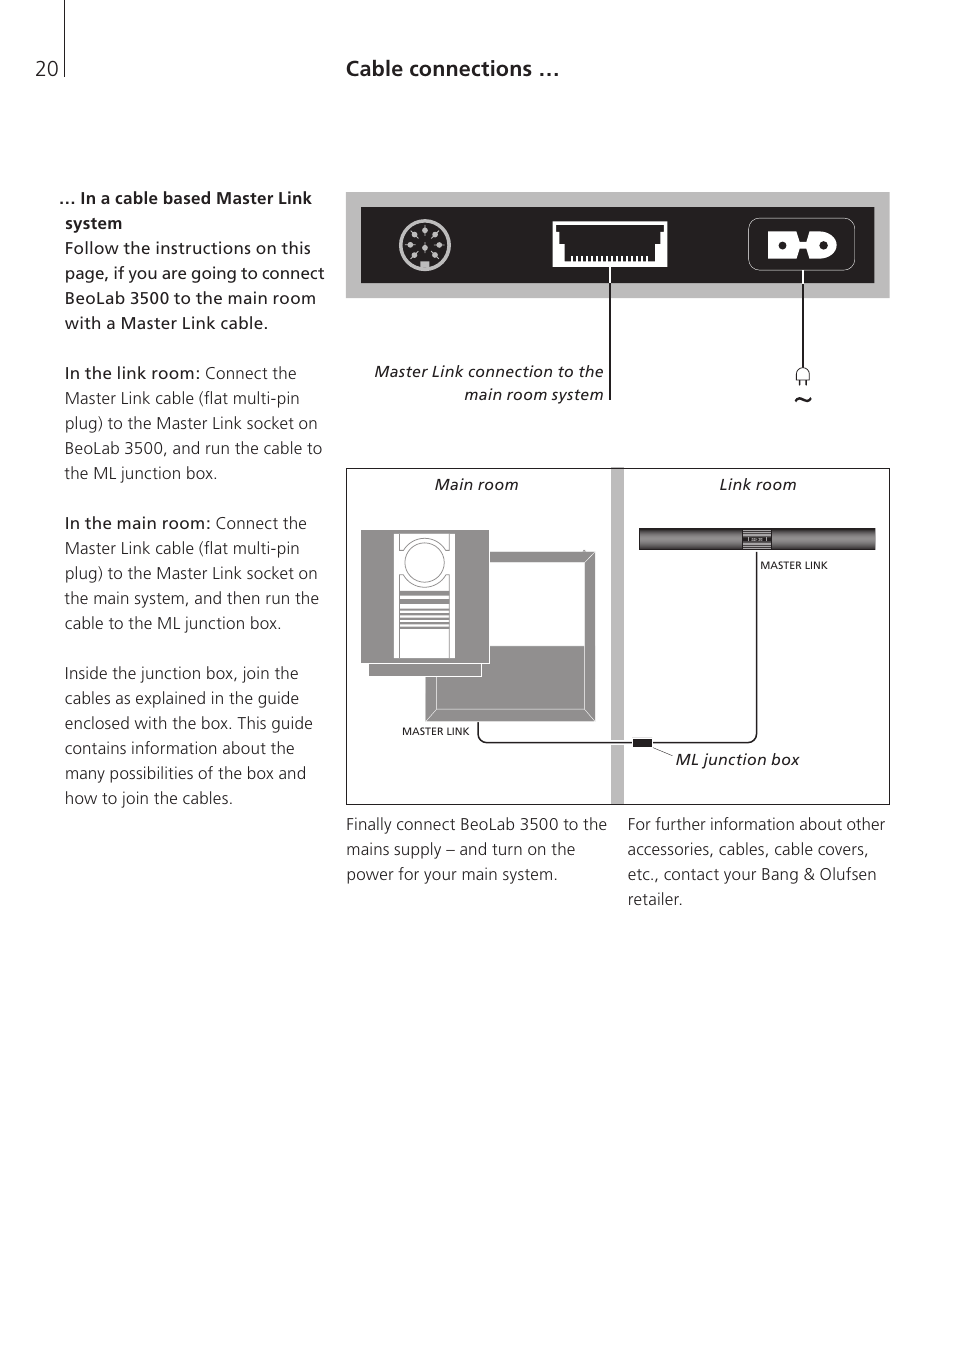 Cable connections, In a cable based master link system | Bang & Olufsen BeoLab  3500 - User Guide User Manual | Page 20 / 28